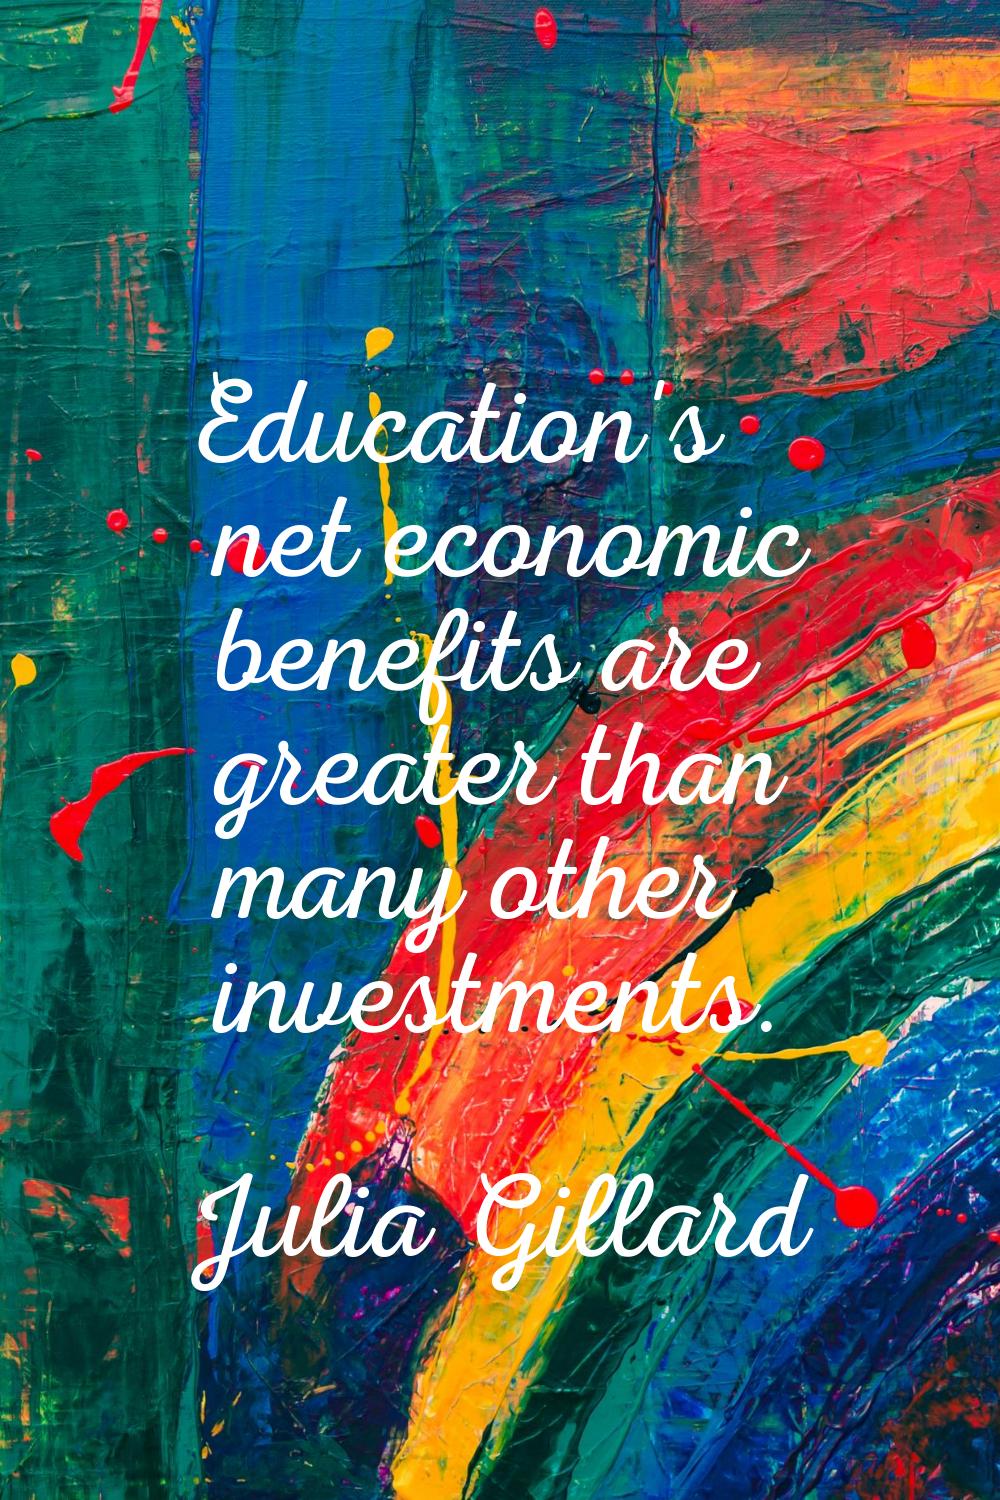 Education's net economic benefits are greater than many other investments.